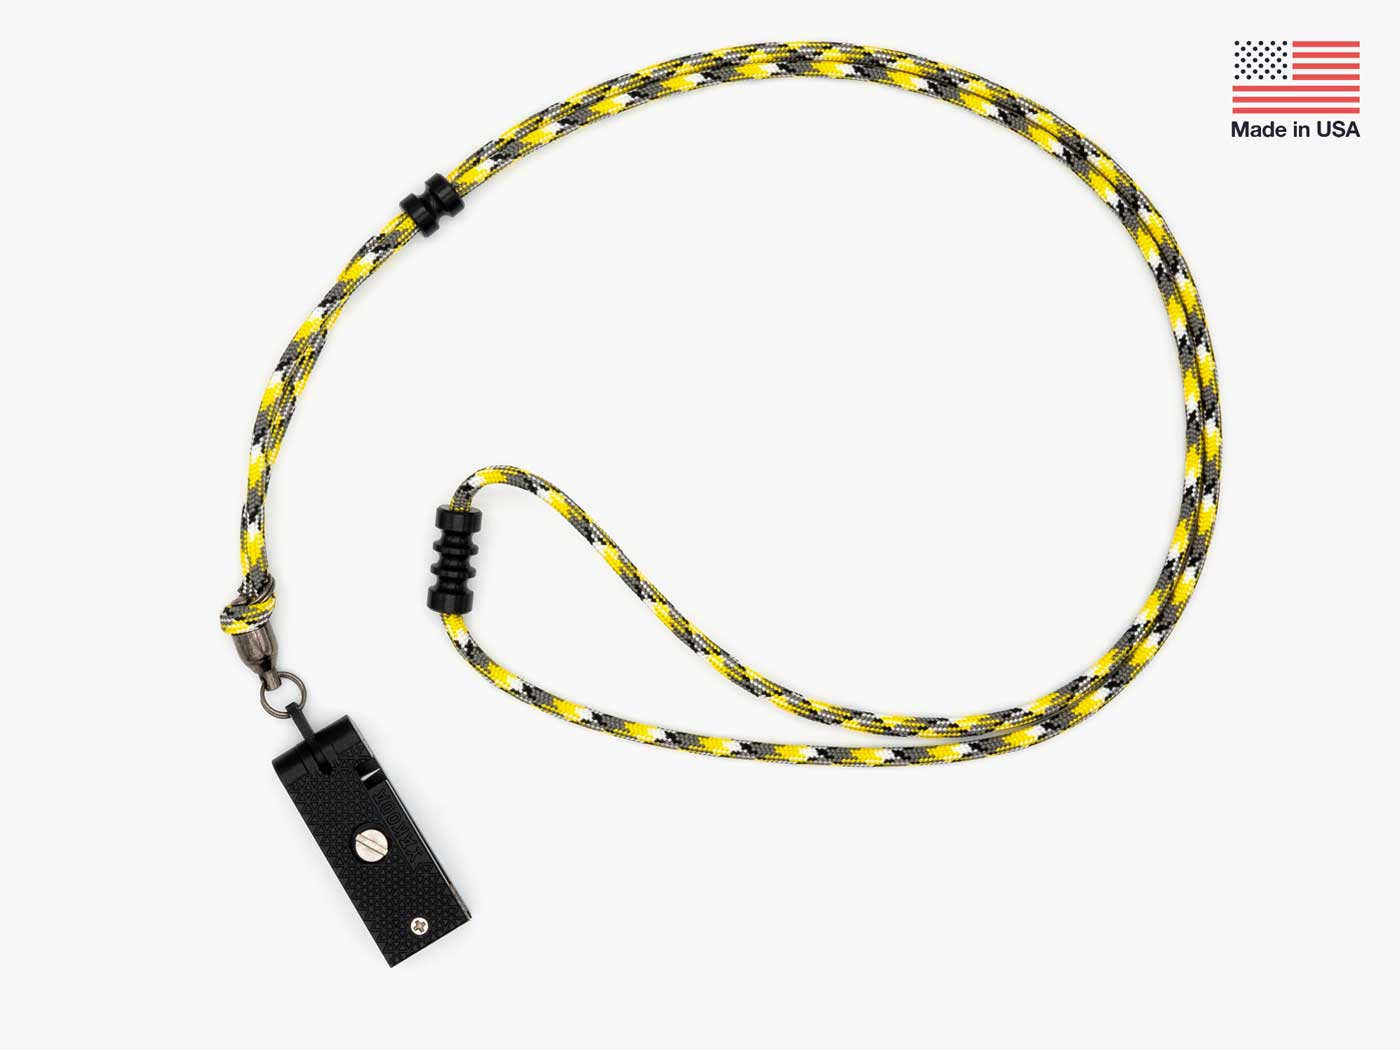 6 Pack Lanyards Adjustable Extend Length Lanyard with id Badge